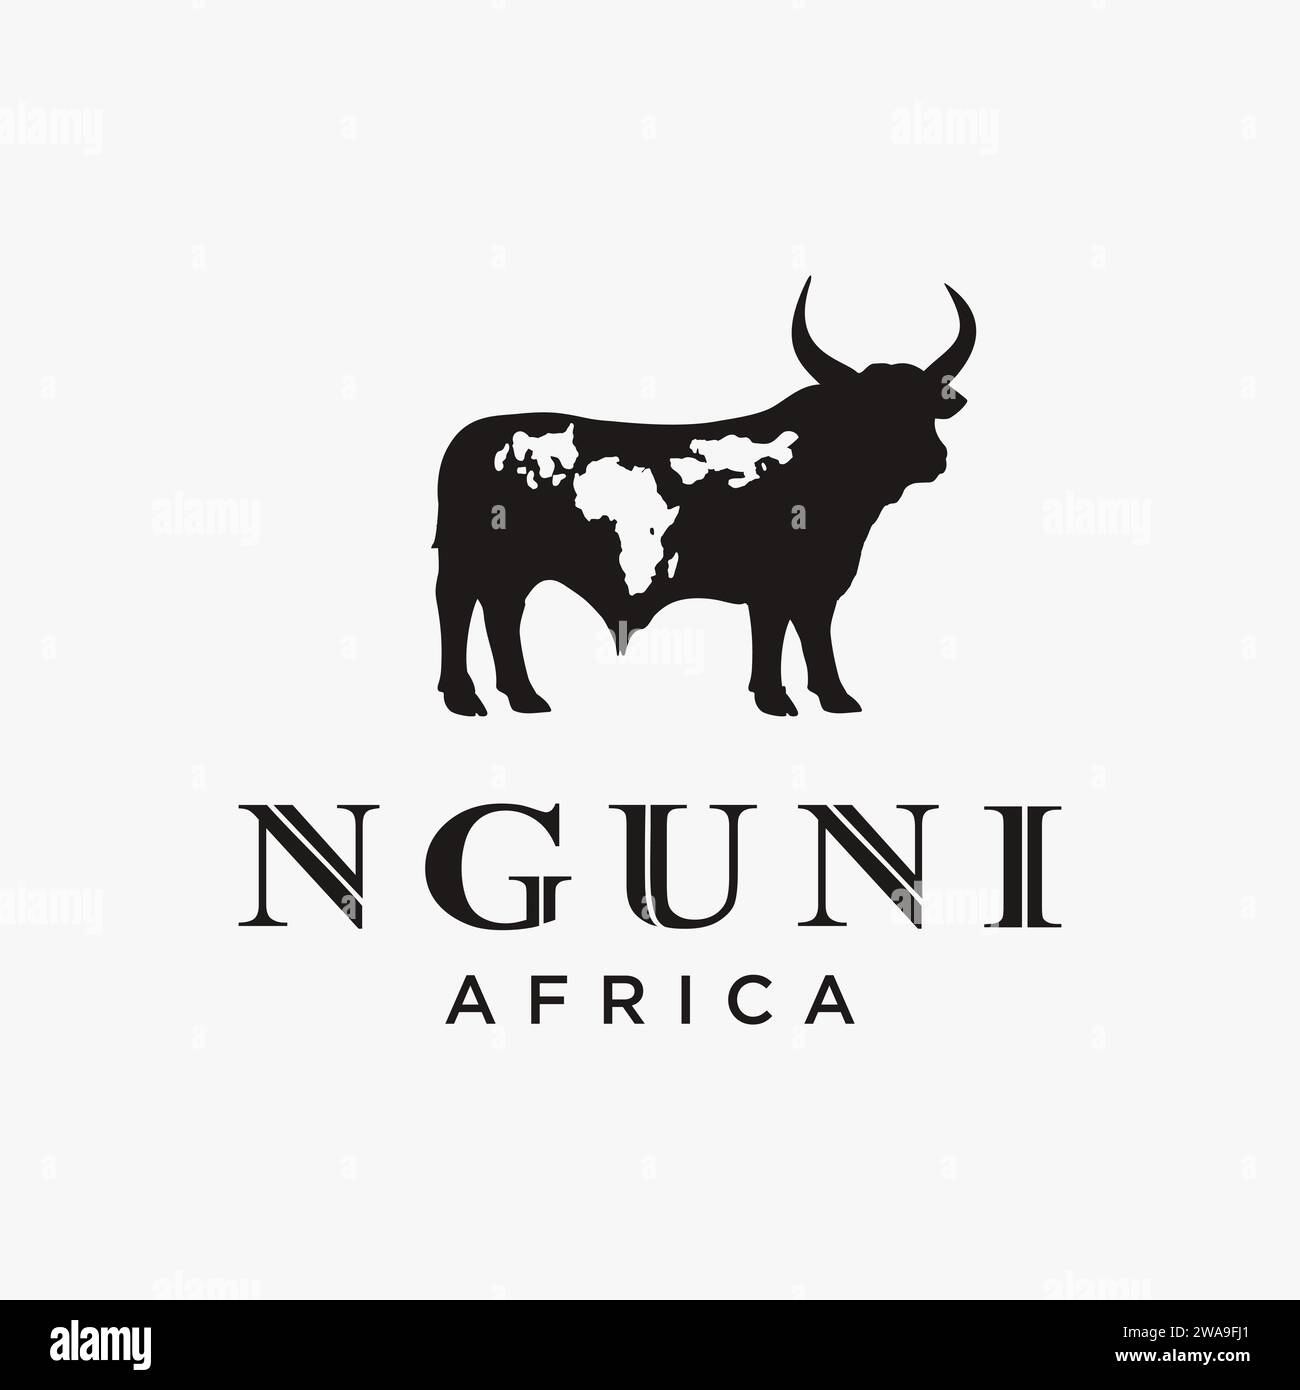 Nguni buffalo cow logo icon vector template on white background with african word map mark Stock Vector